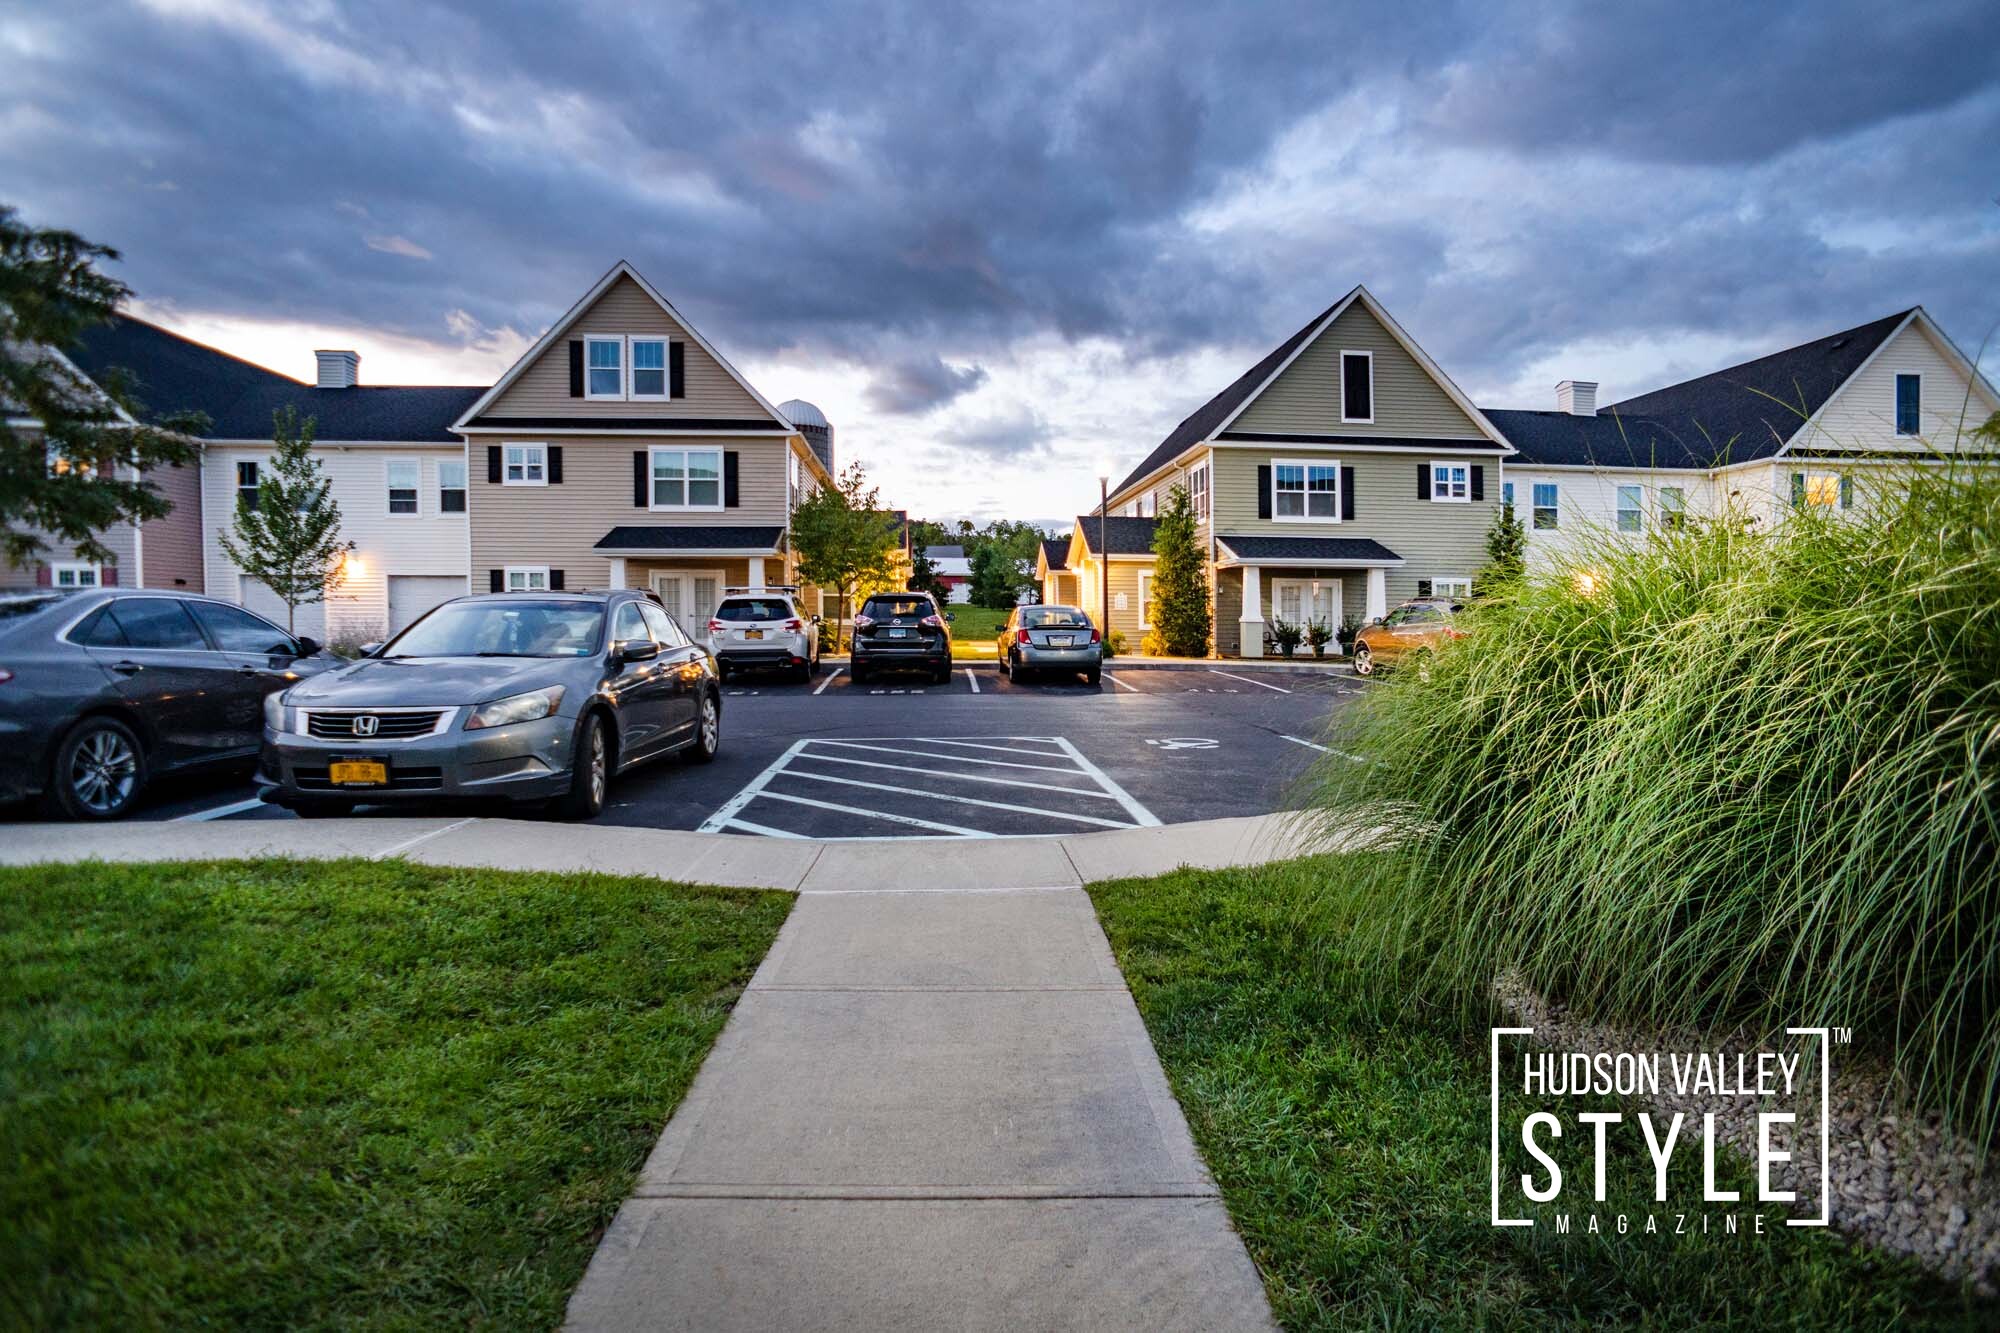 Hudson Valley Real Estate and Aerial Photography Galley: Brookside Meadows Luxury Rental Community in Pleasant Valley, NY – Real Estate Photography Project by Duncan Avenue Studios